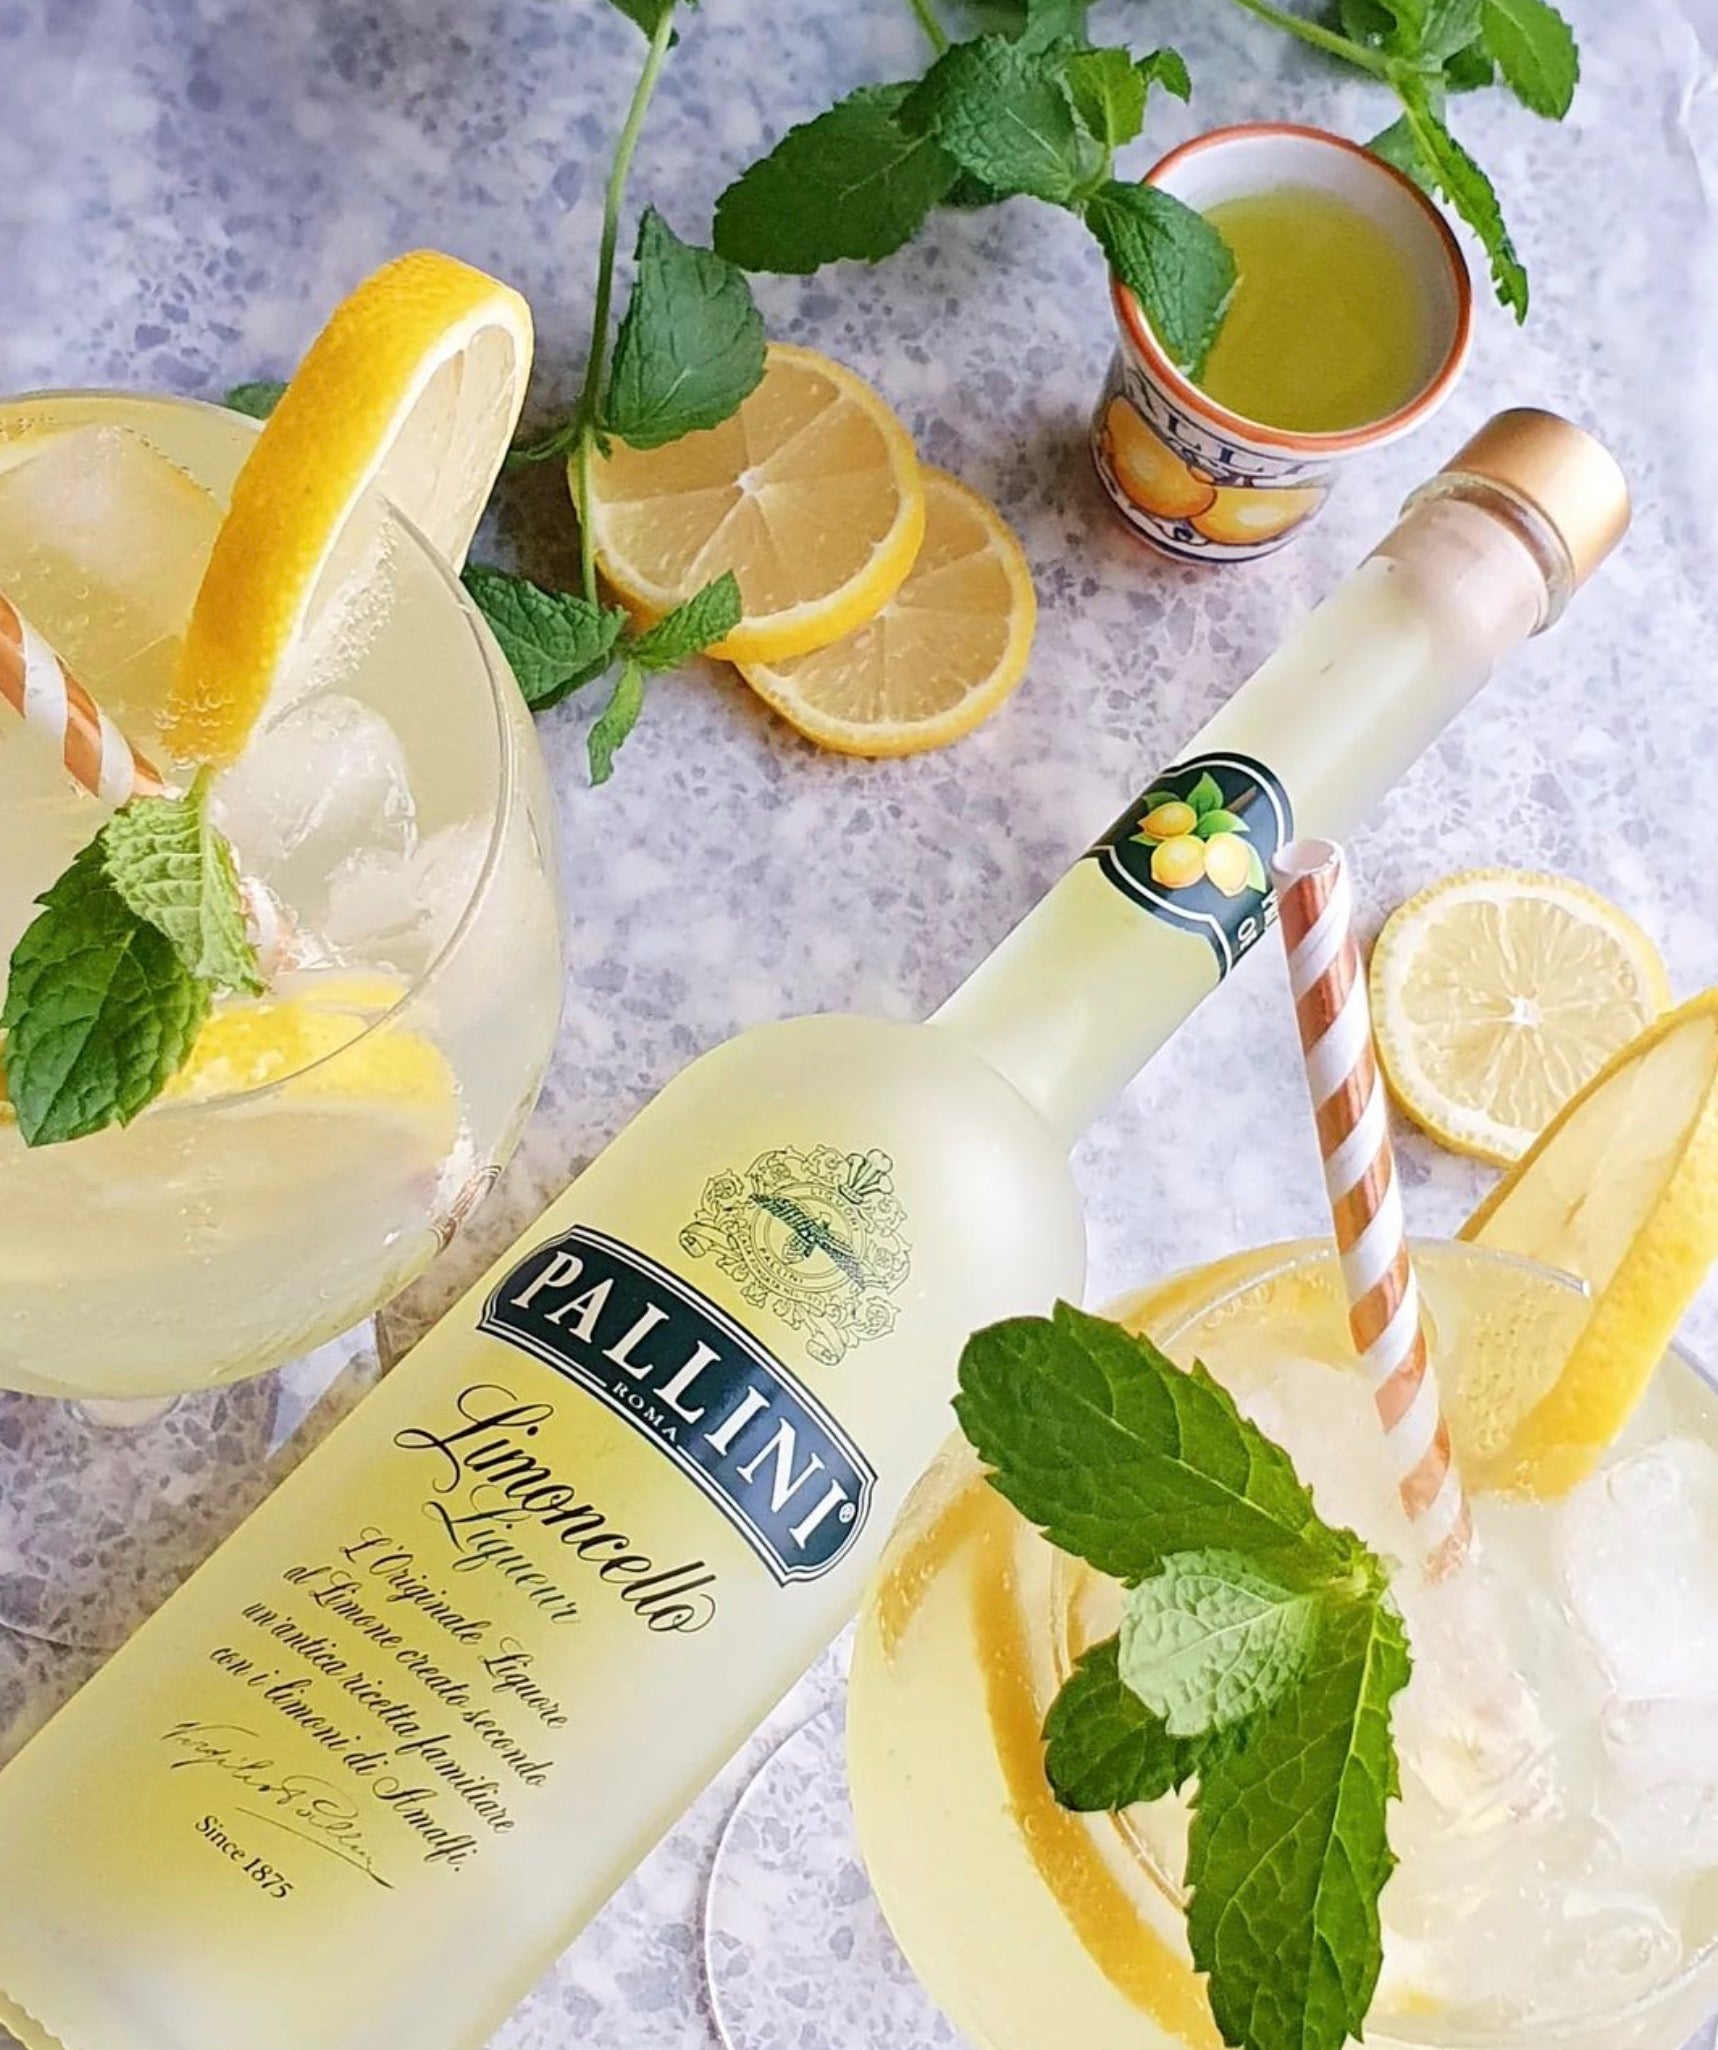 Pallini Limoncello Liqueur  Delivery & Gifting Available